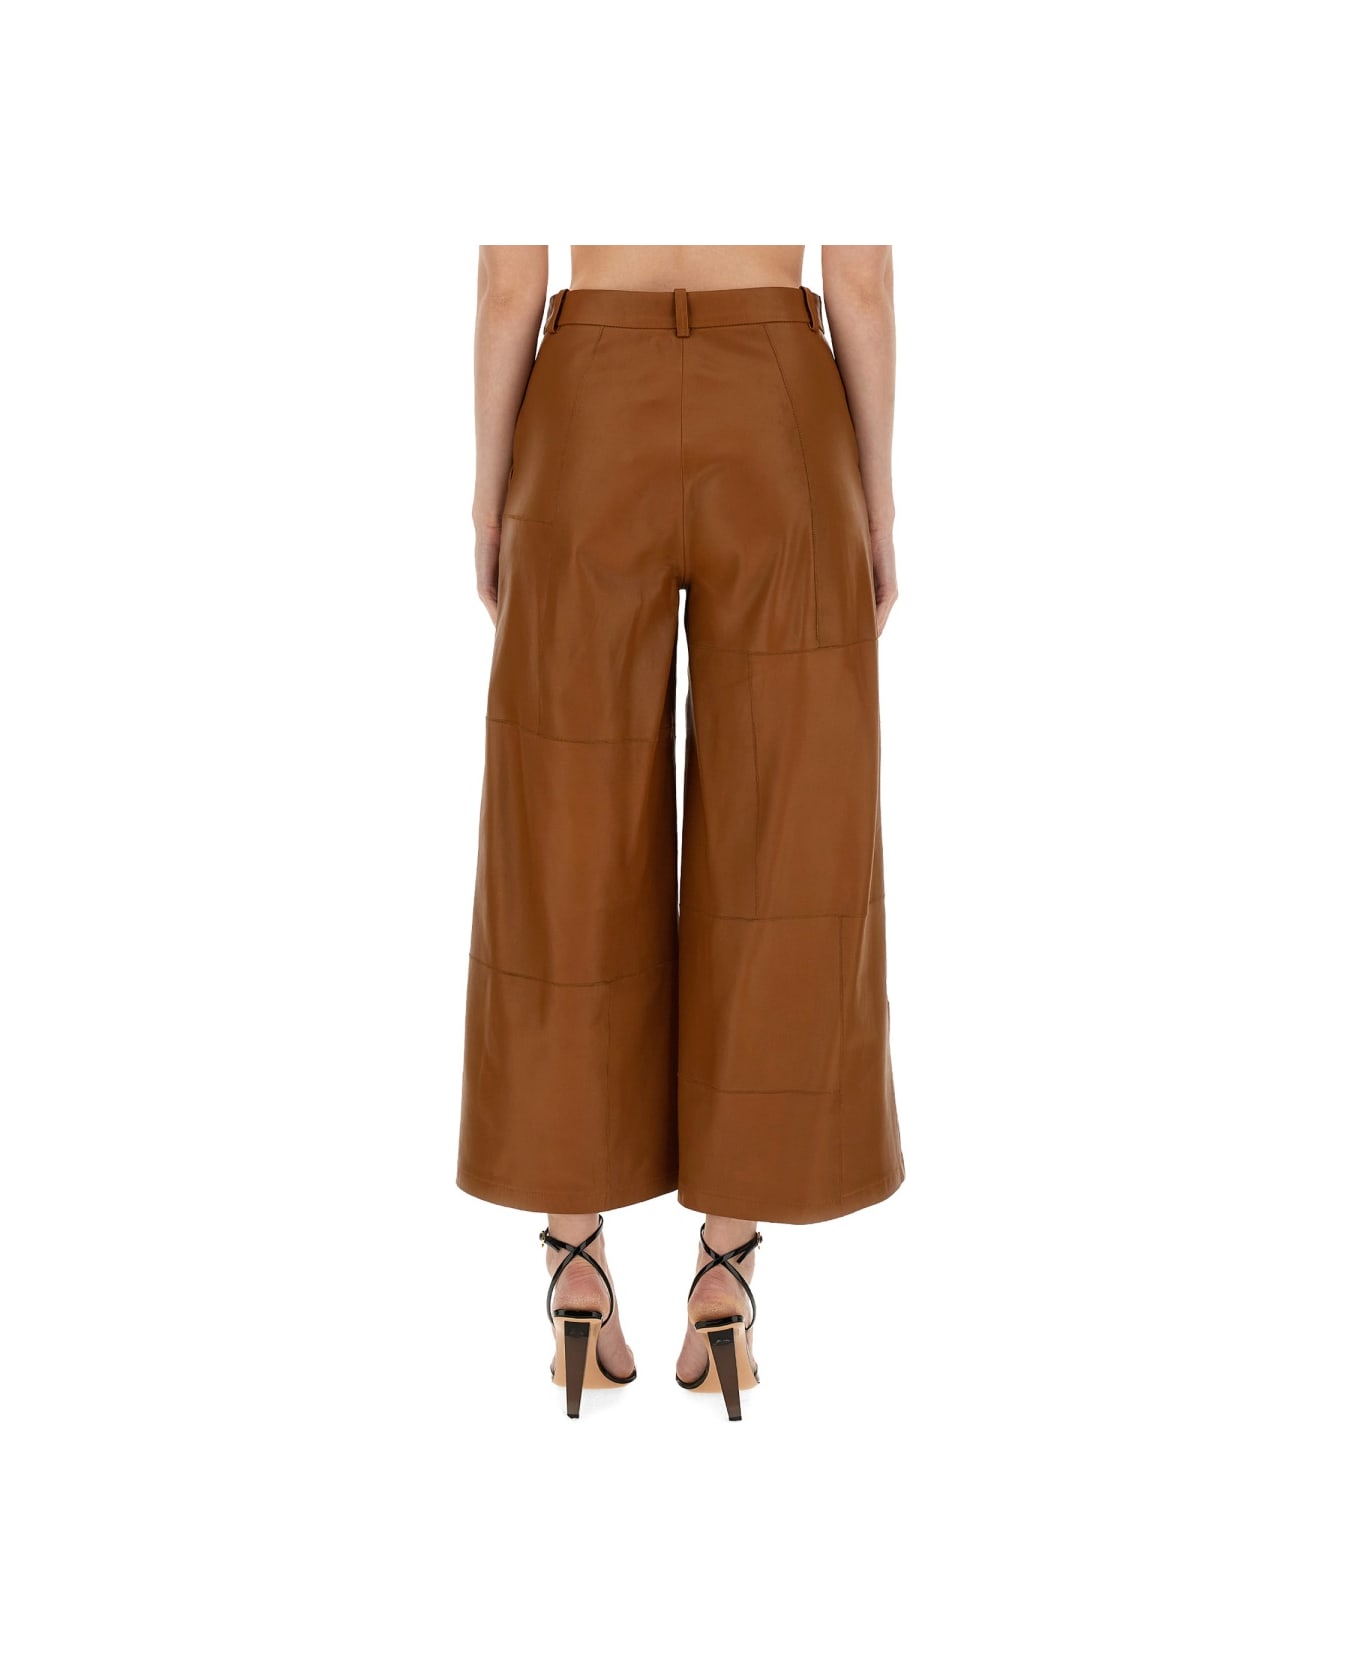 Alysi Patch Pants - Leather Brown ボトムス